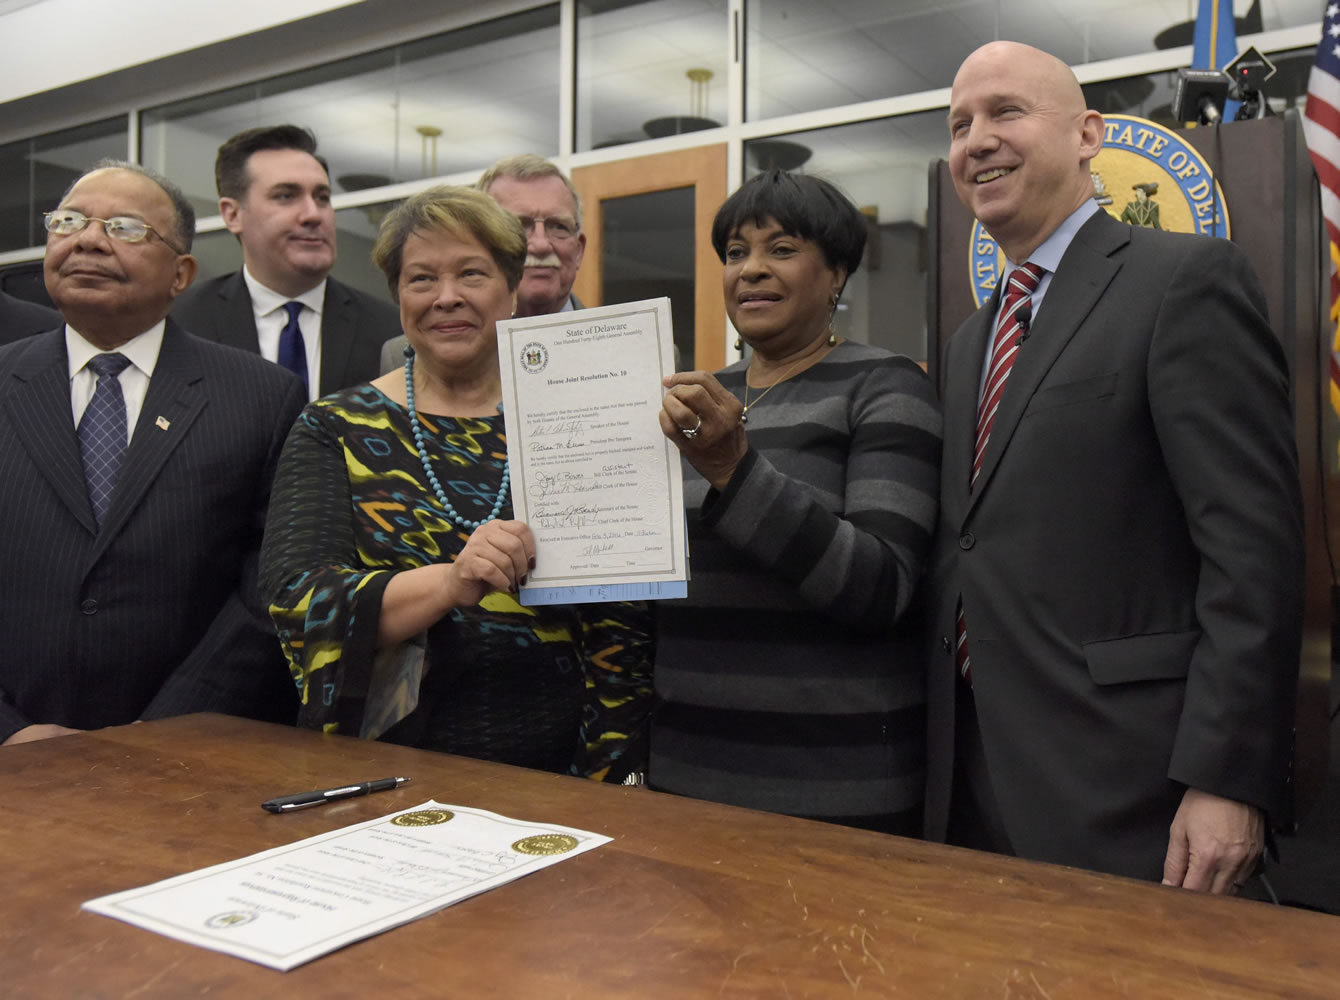 Delaware Gov. Jack Markell, right, stands with state legislators, from left, Rep. J.J. Johnson, Rep. Sean Lynn, Sen. Margaret Rose Henry, Sen. Brian Bushweller and Rep. Stephanie Bolden, after signing House Joint Resolution 10, which apologizes for the state&#039;s role in slavery Wednesday at the Delaware Public Archives in Dover, Del. Markell also presented a proclamation recognizing African American History Month.